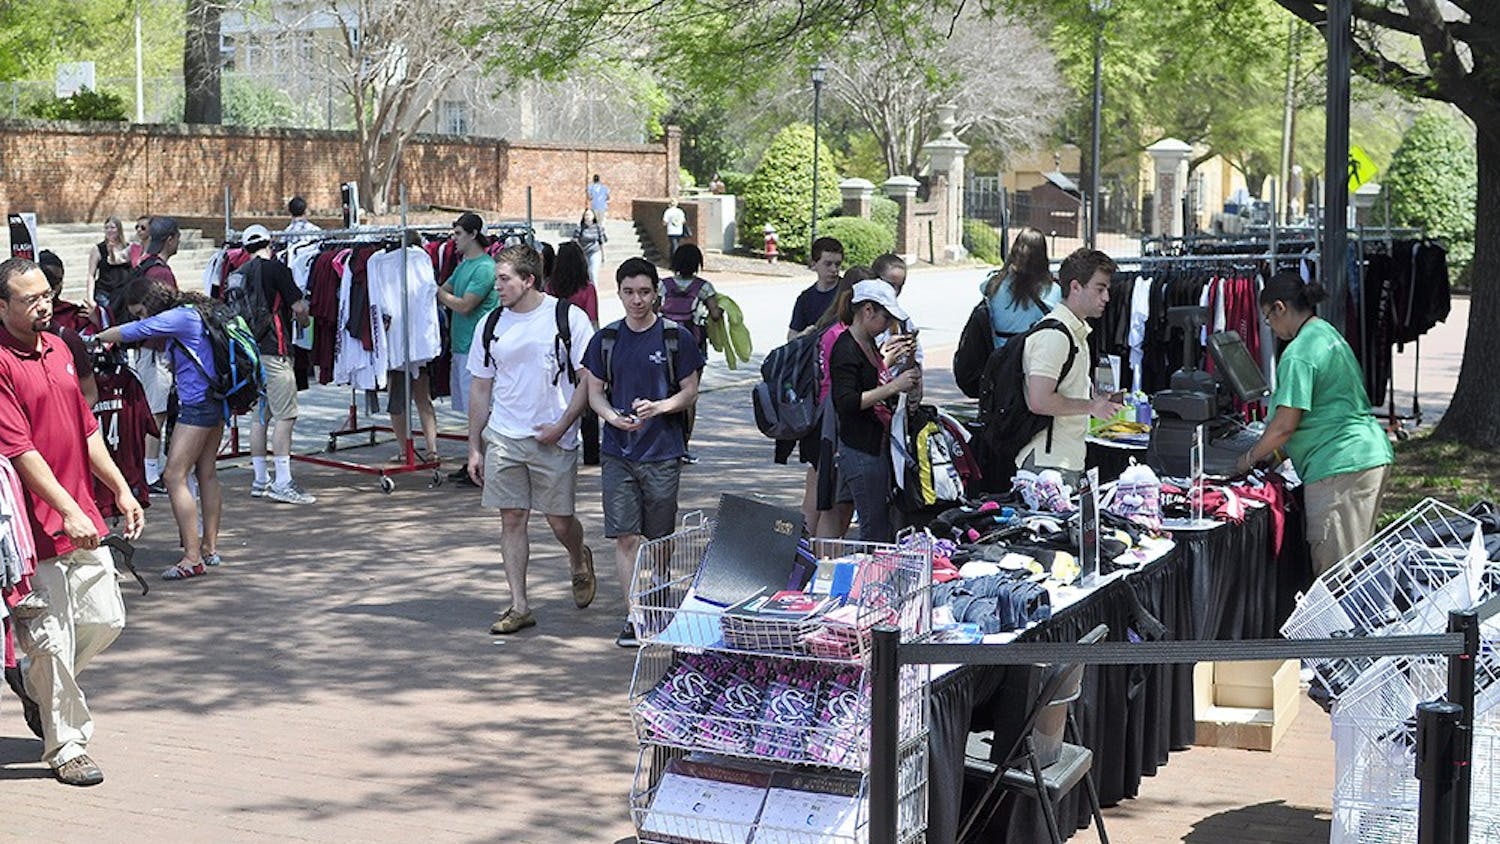 	Members of the USC Fashion Board sell T-shirts and hair ties designed by students, as well as tickets to Thursday’s fashion show on Greene Street Monday.